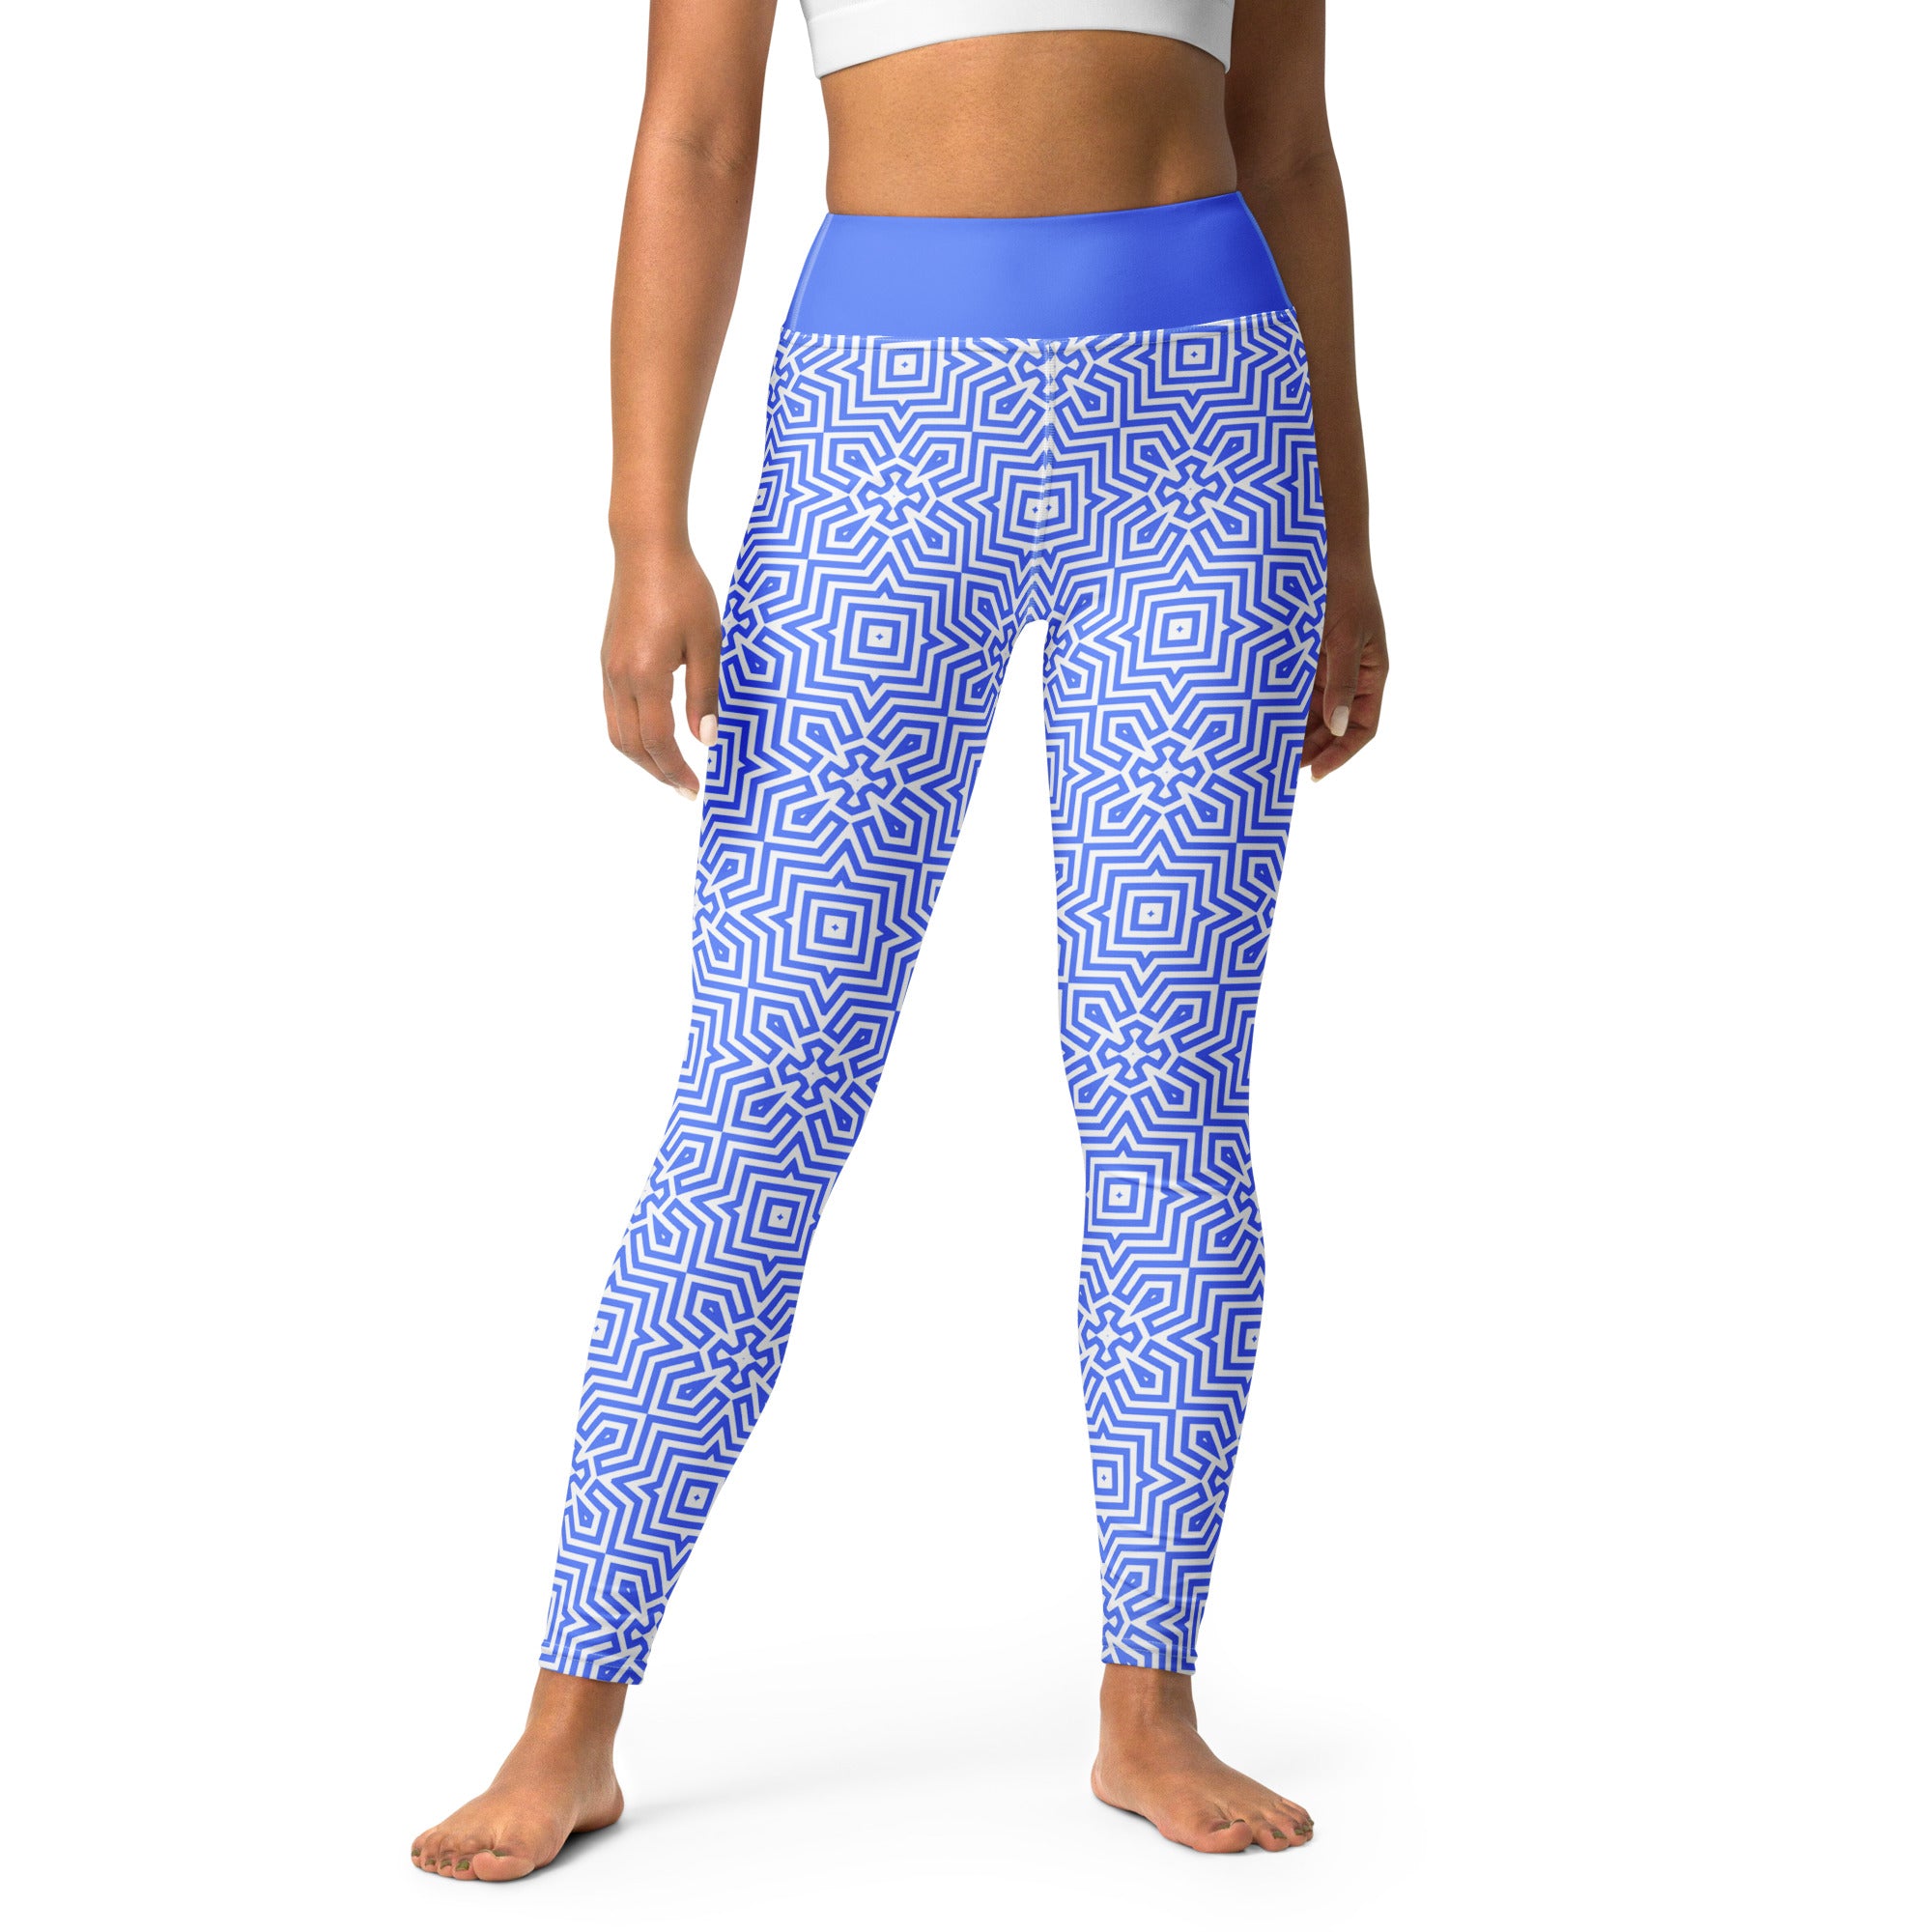 Product image of Radiant Reflection Yoga Leggings highlighting the high waistband and fit.